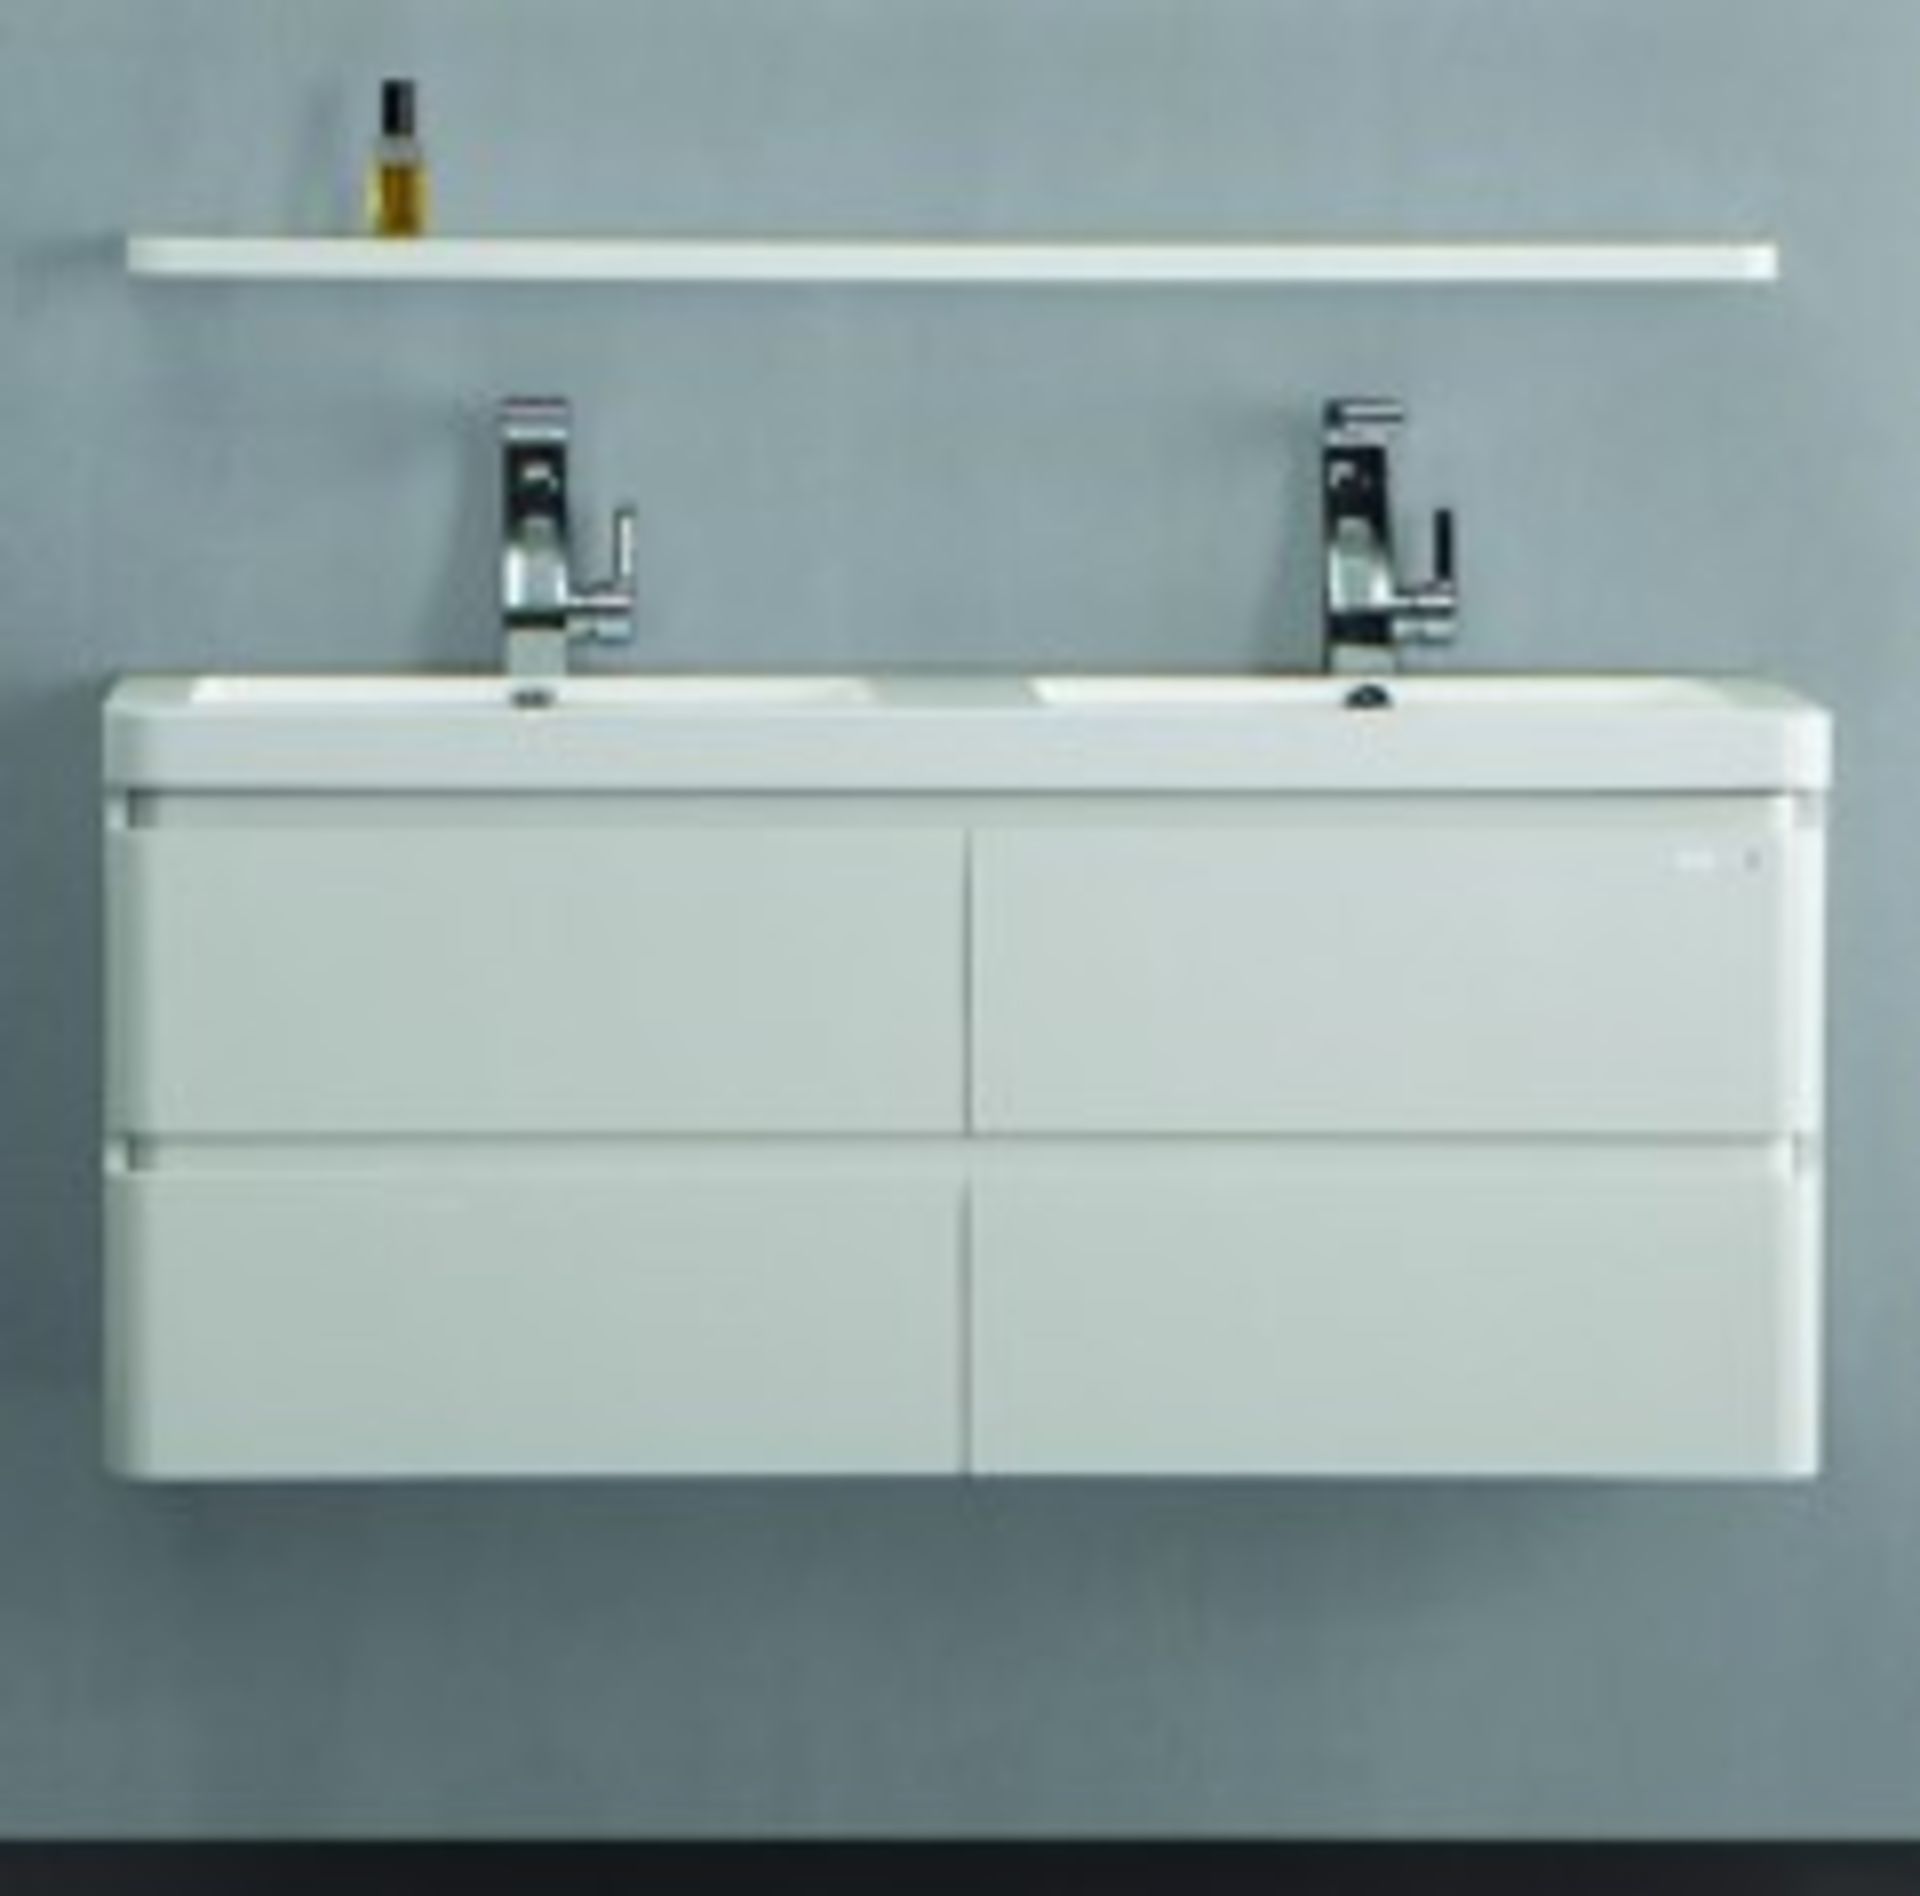 6 x Austin Bathrooms Urban 120 Wall Mounted Bathroom Vanity Units Without Sink Basins - 120cm Wide - Image 2 of 4